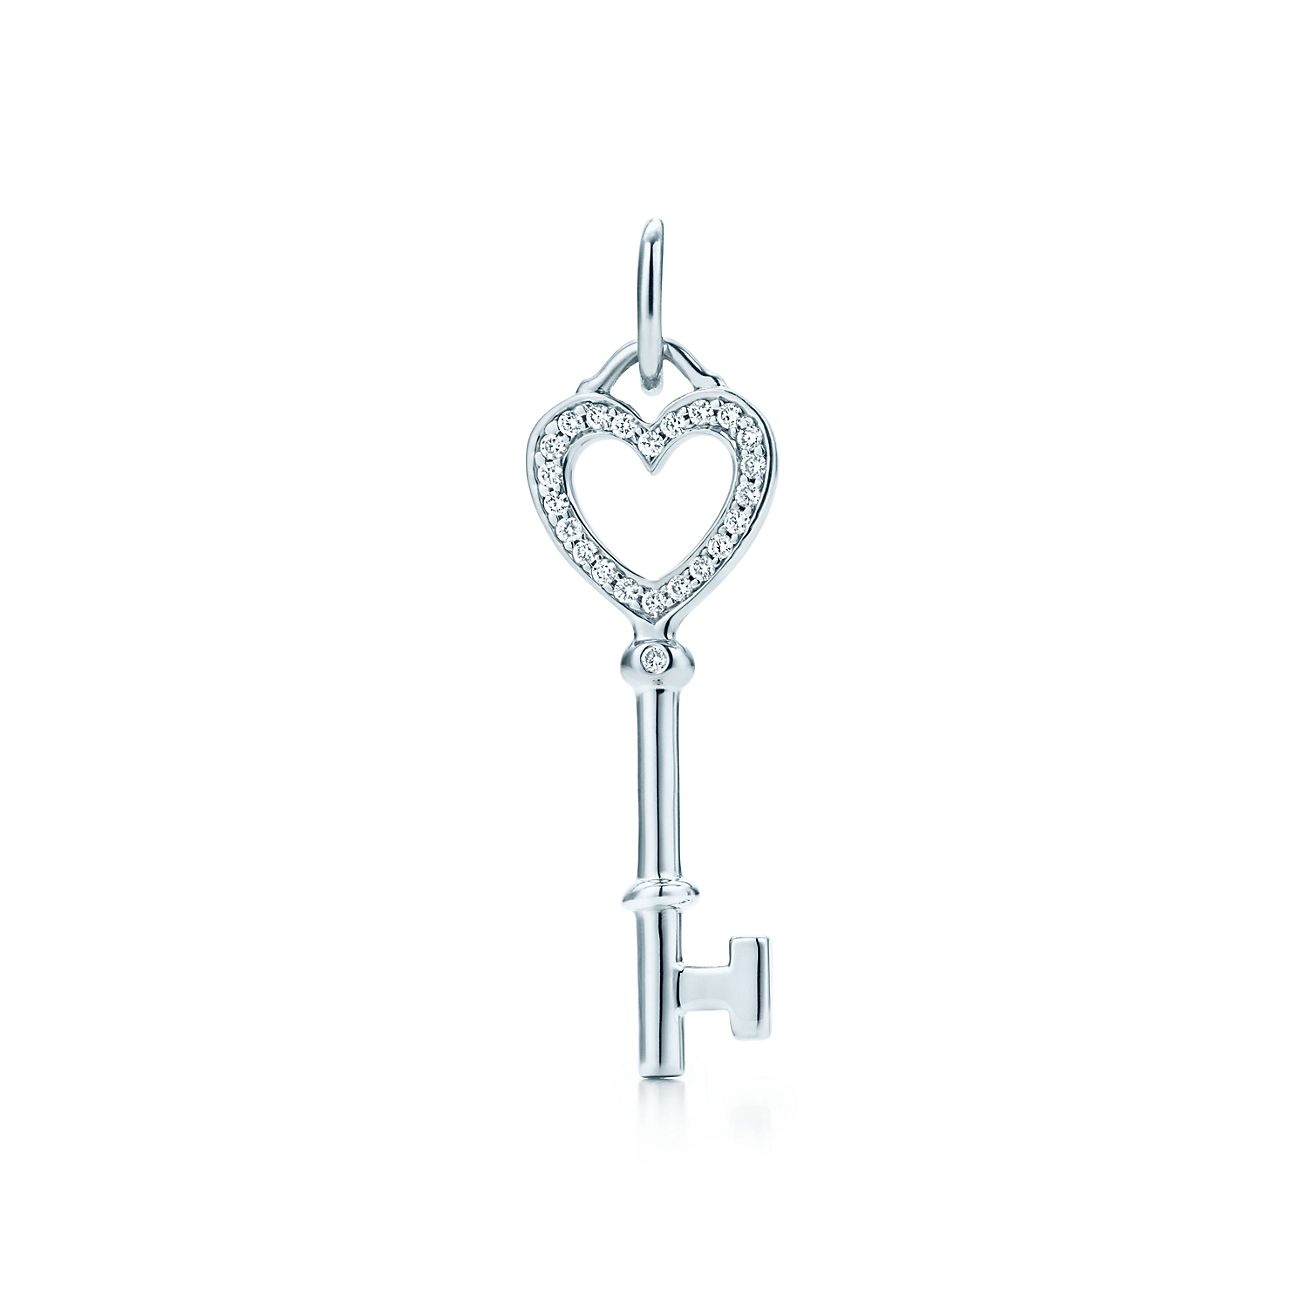 tiffany necklace with heart and key pendant